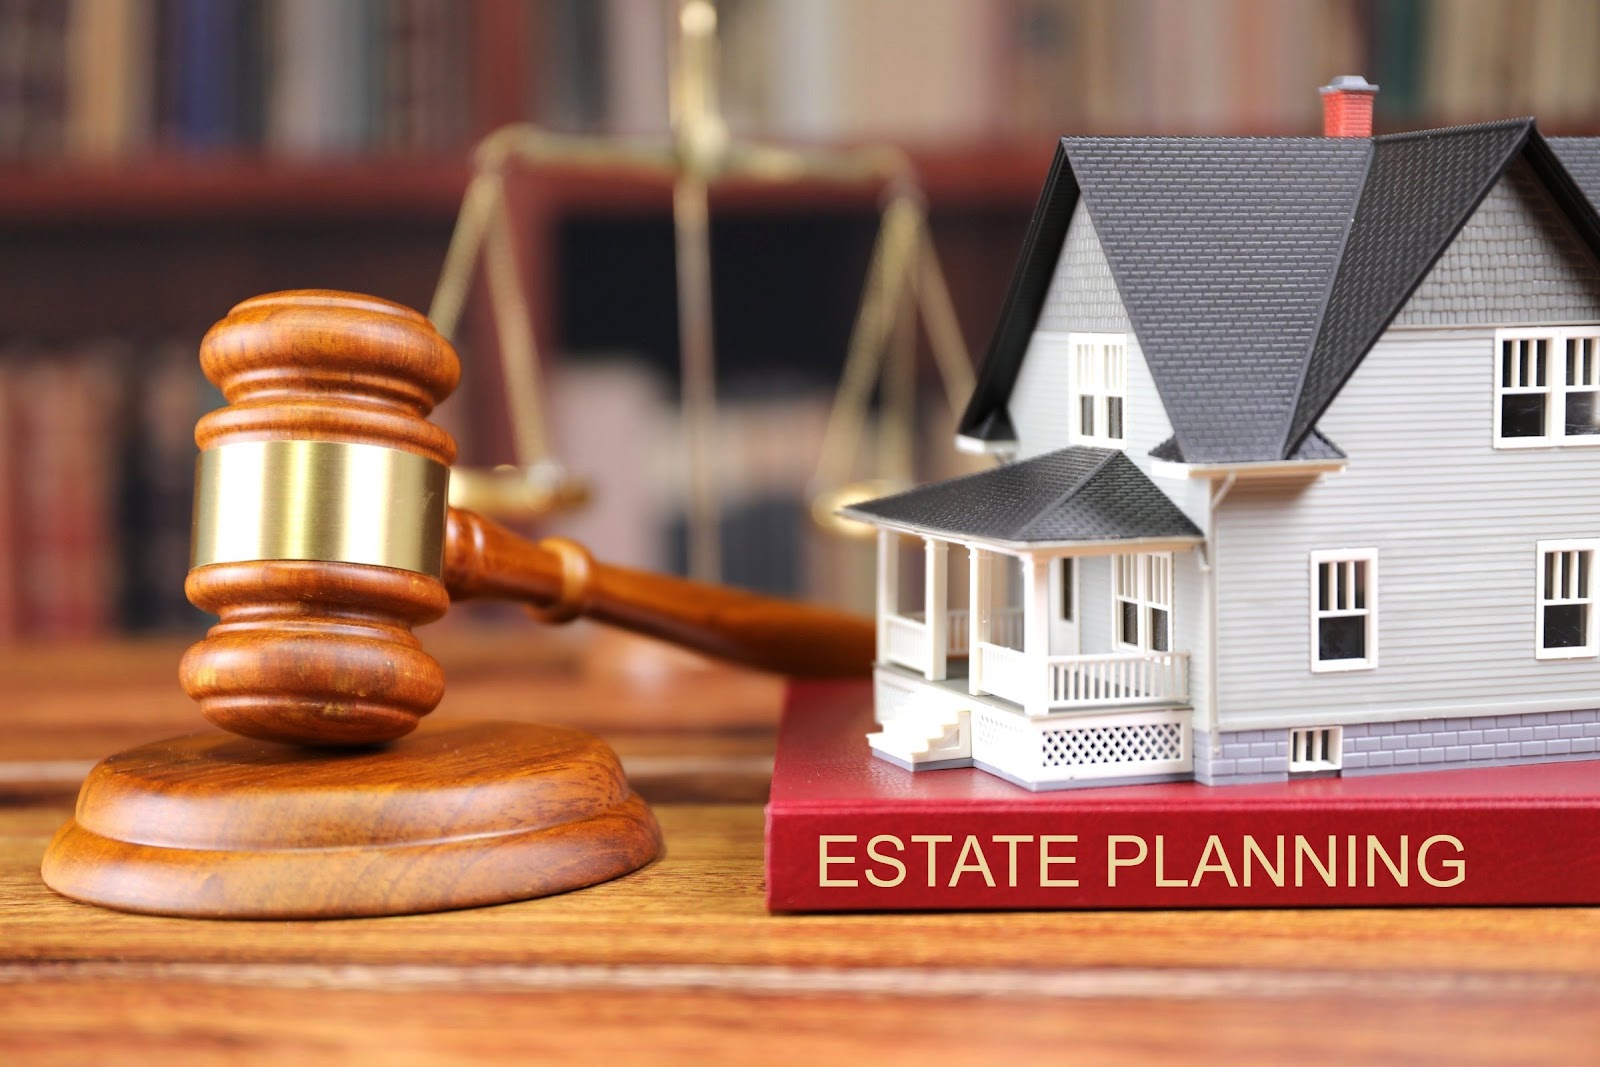 How Can Estate Planning Benefit Small Business Owners?